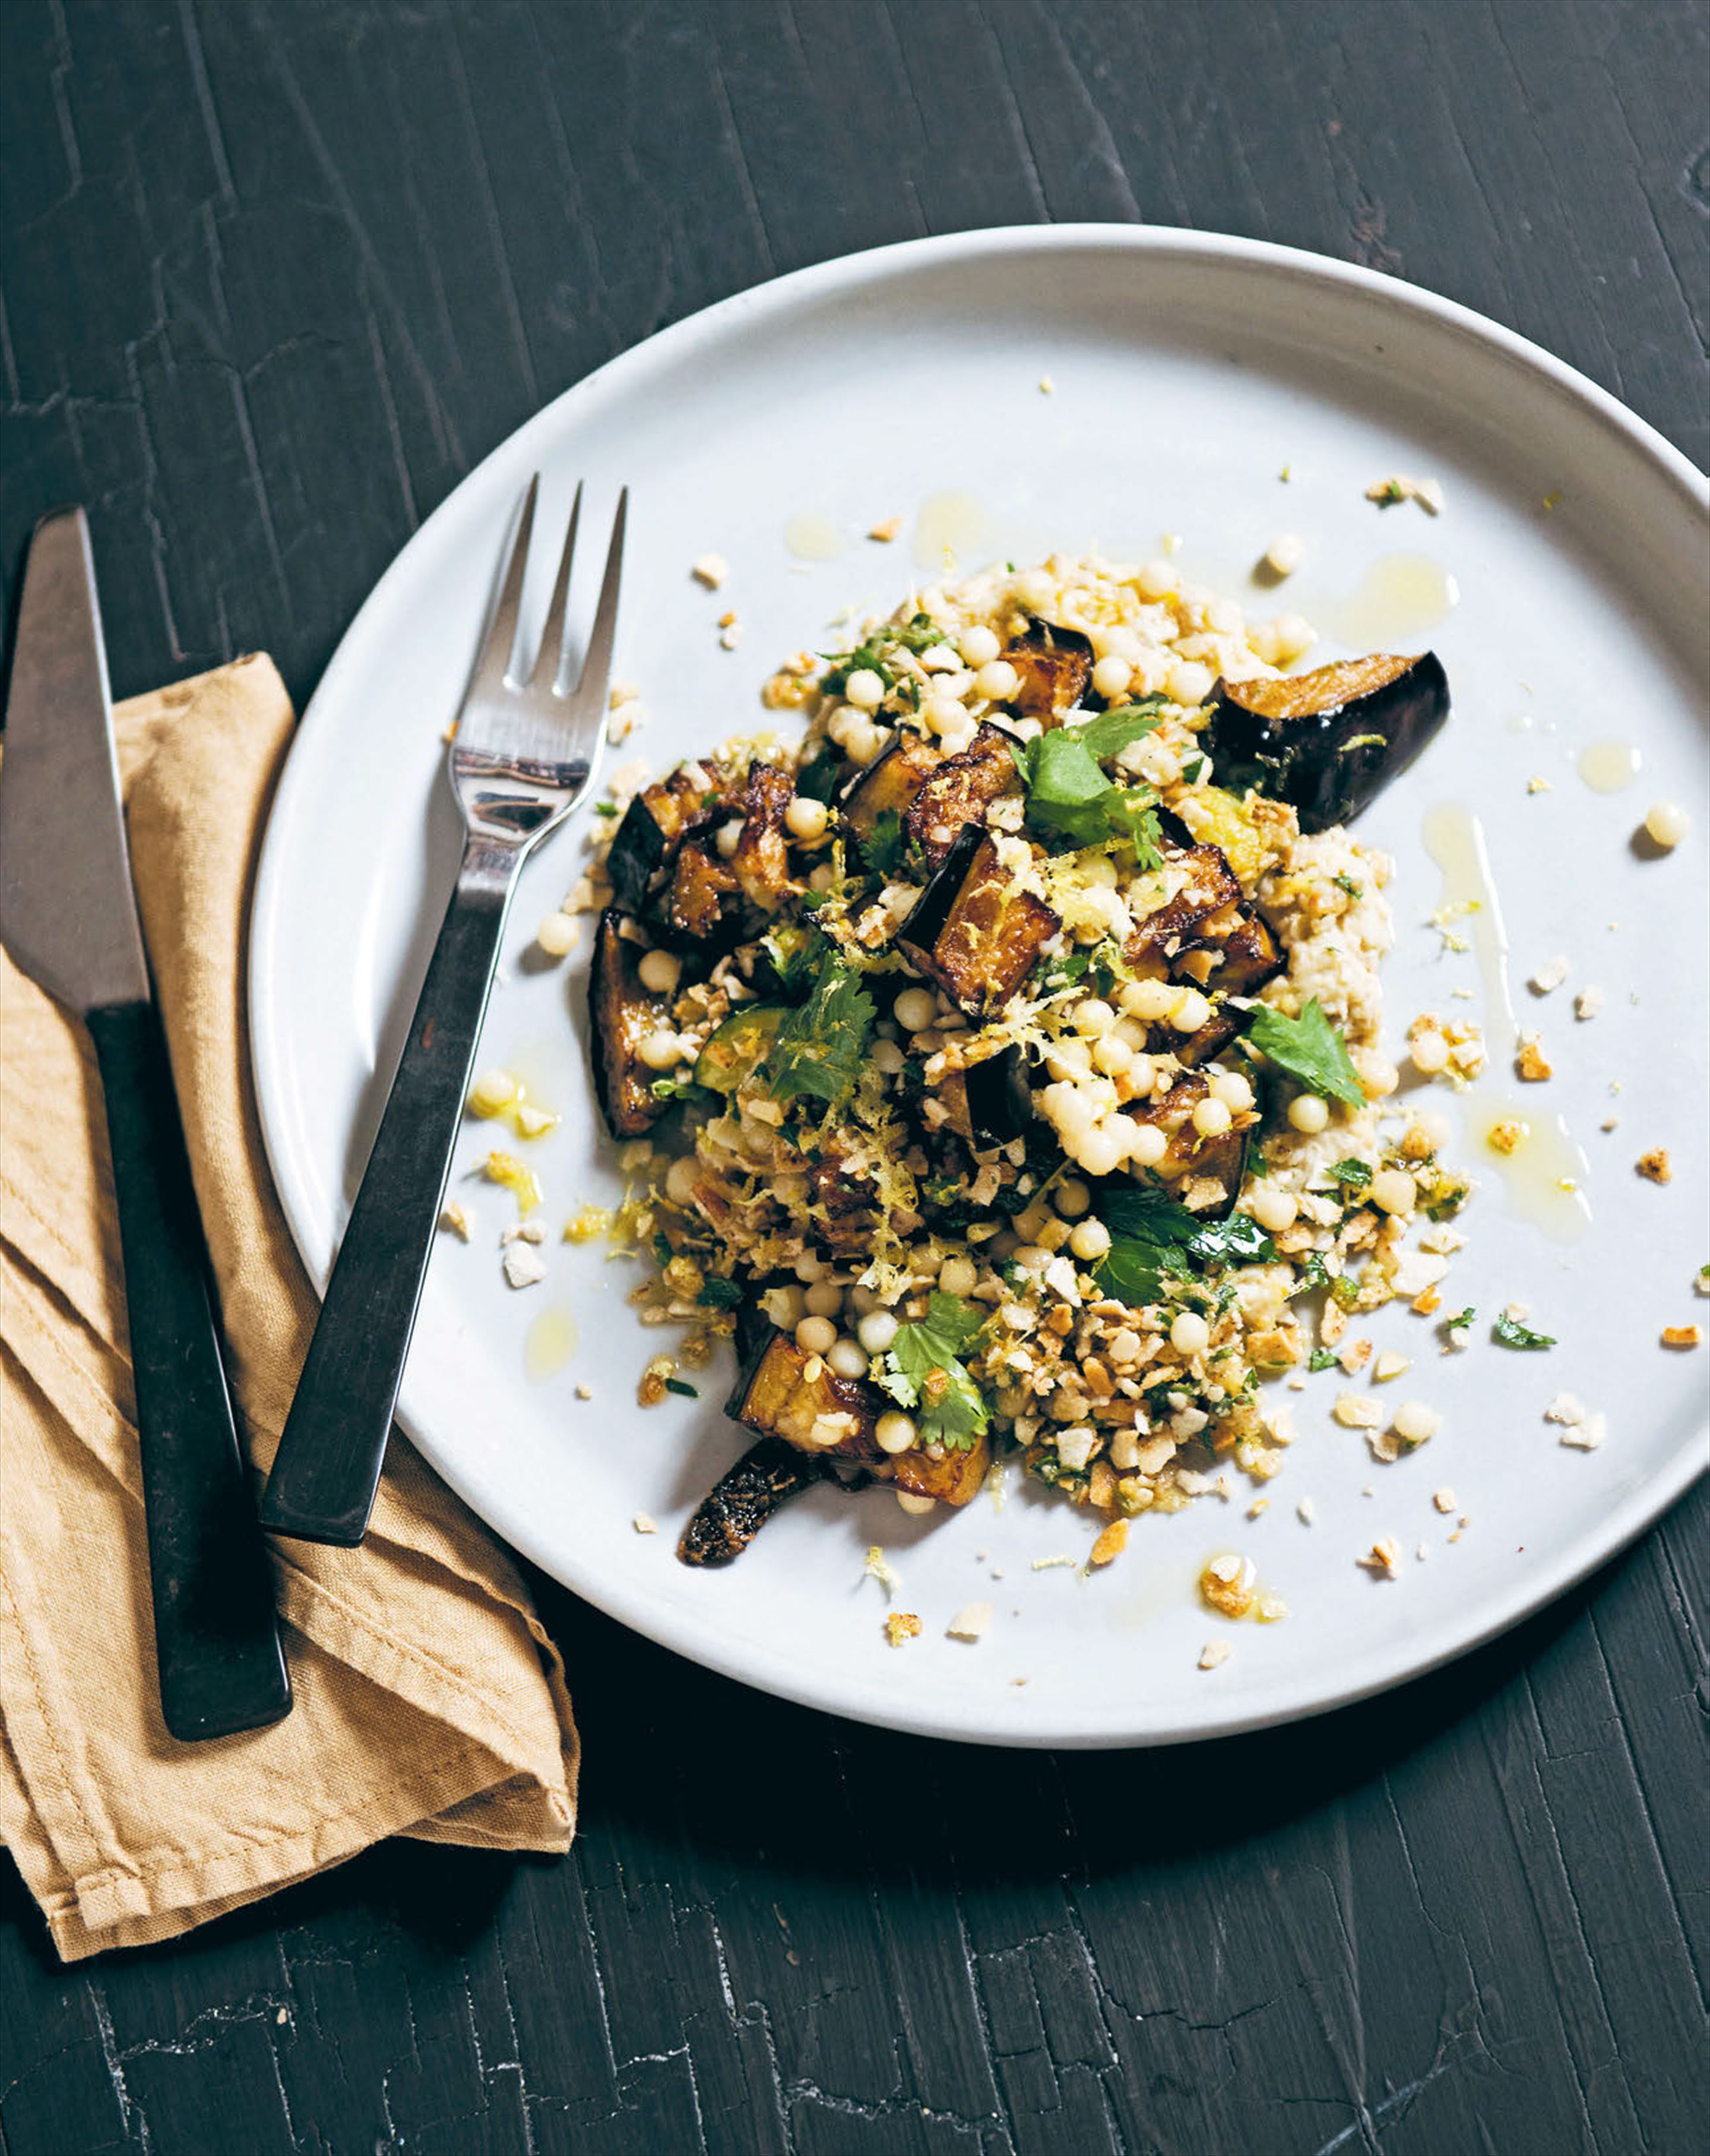 Grilled zucchini with couscous, smoked eggplant & pangritata